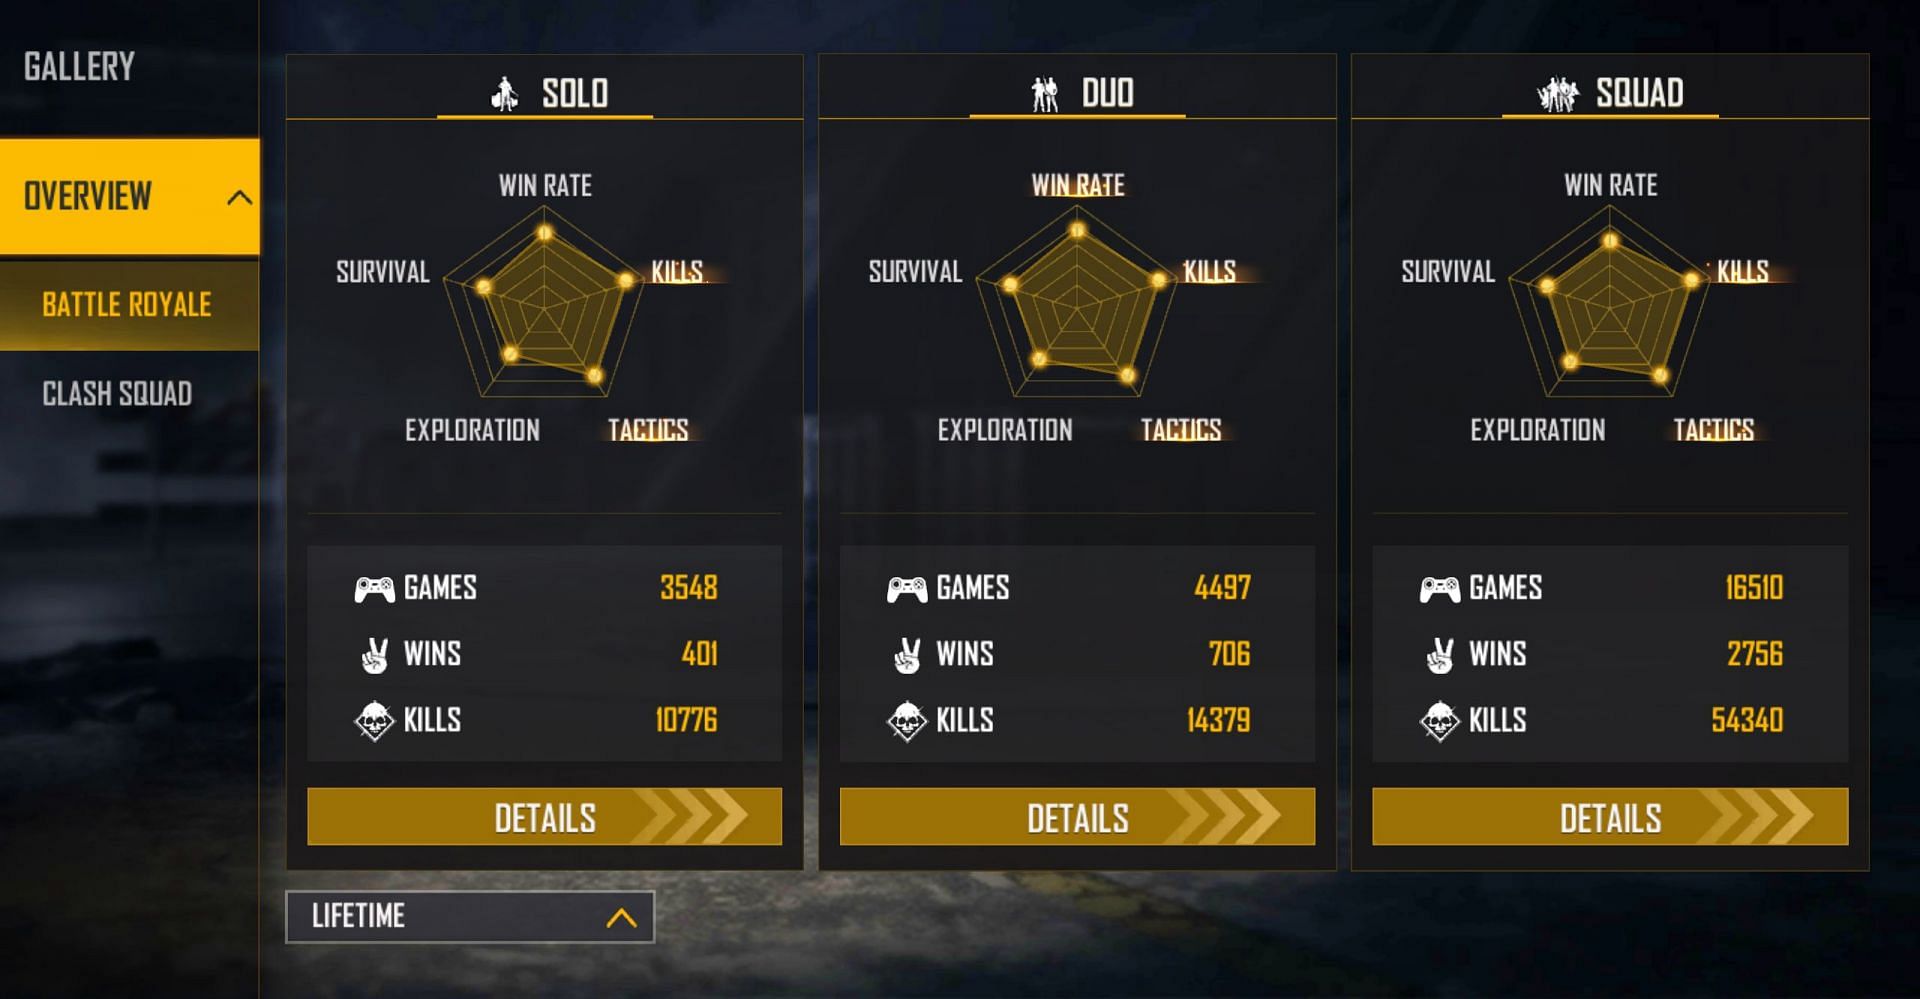 Raistar has played squad matches the most (Image via Free Fire)